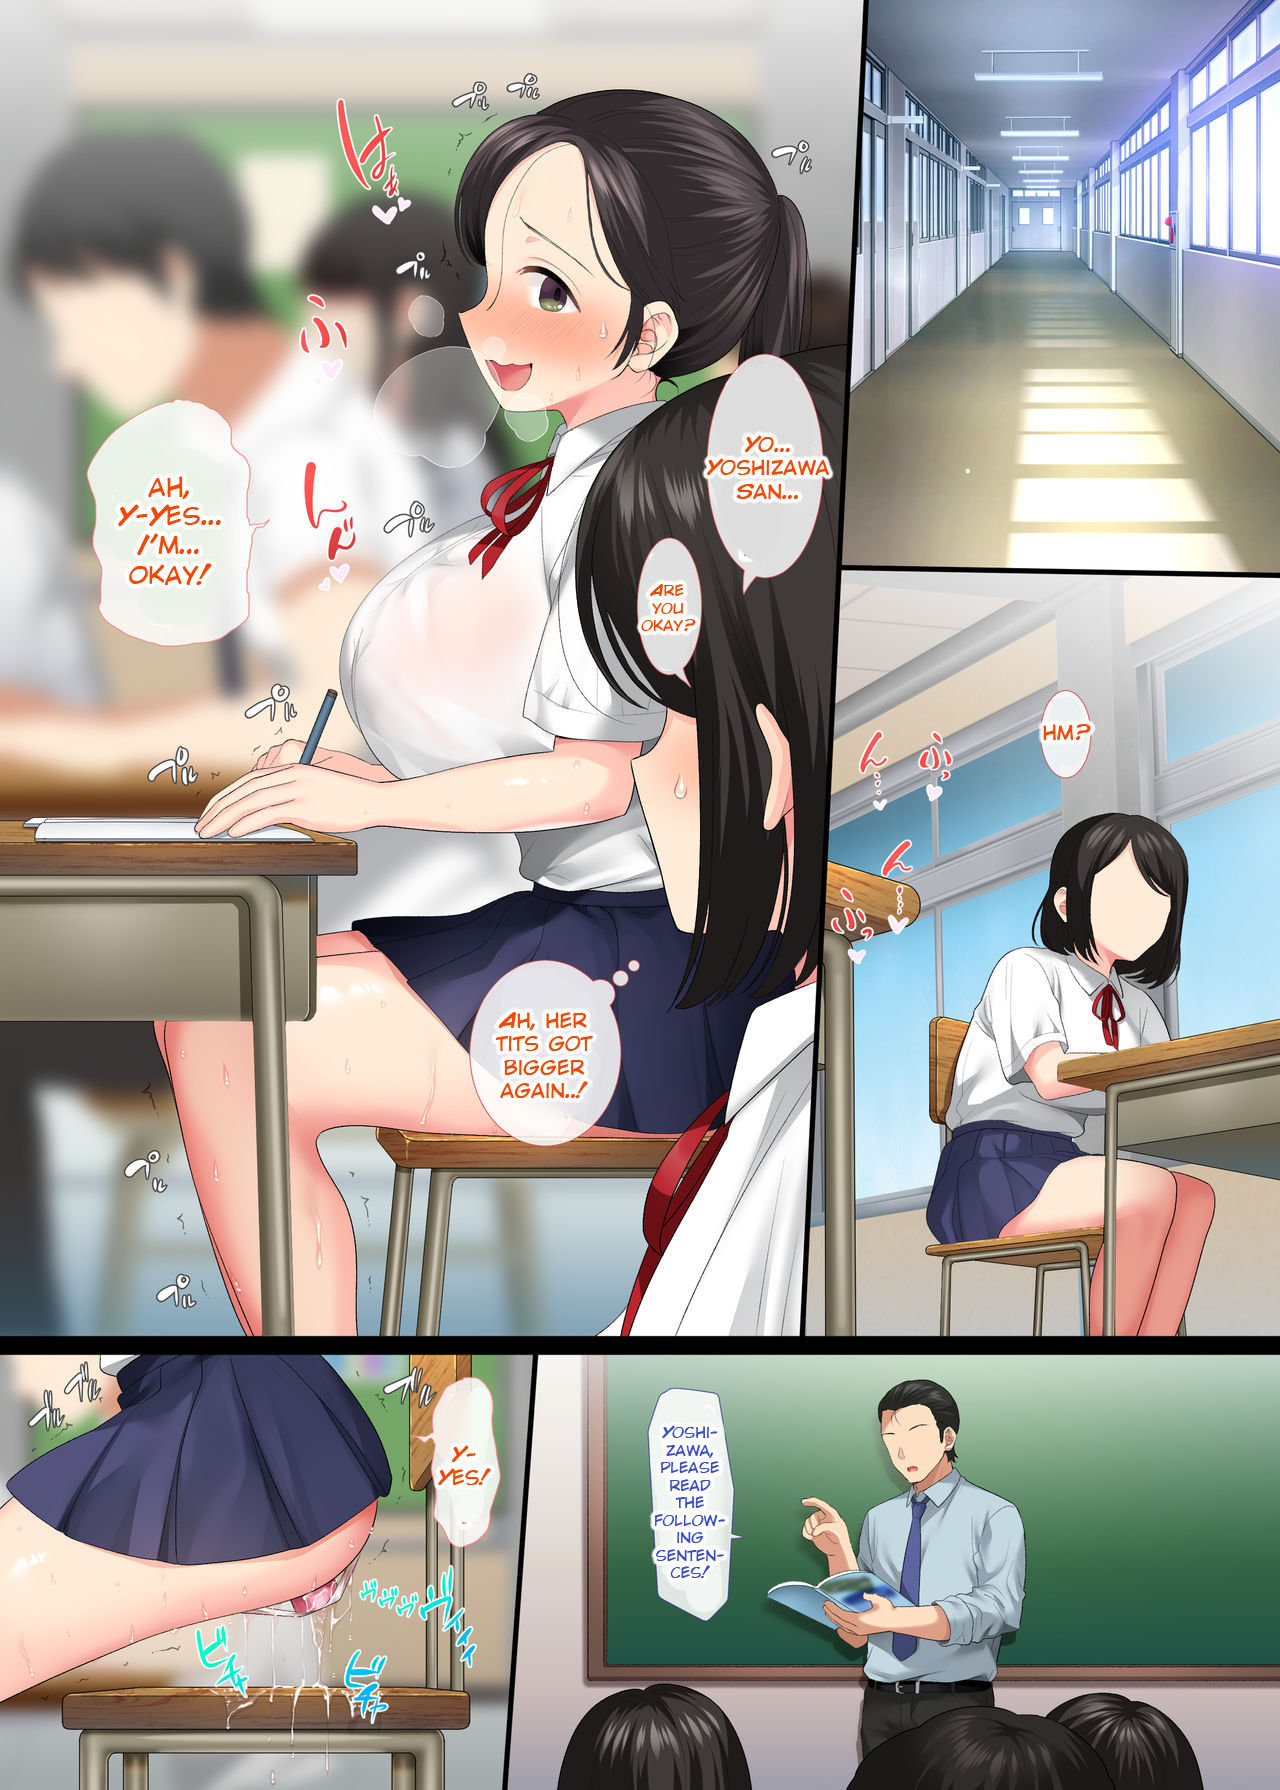 INTROVERTED BEAUTY GETS RAPED OVER AND OVER BY HER HOMEROOM TEACHER 3 - 36